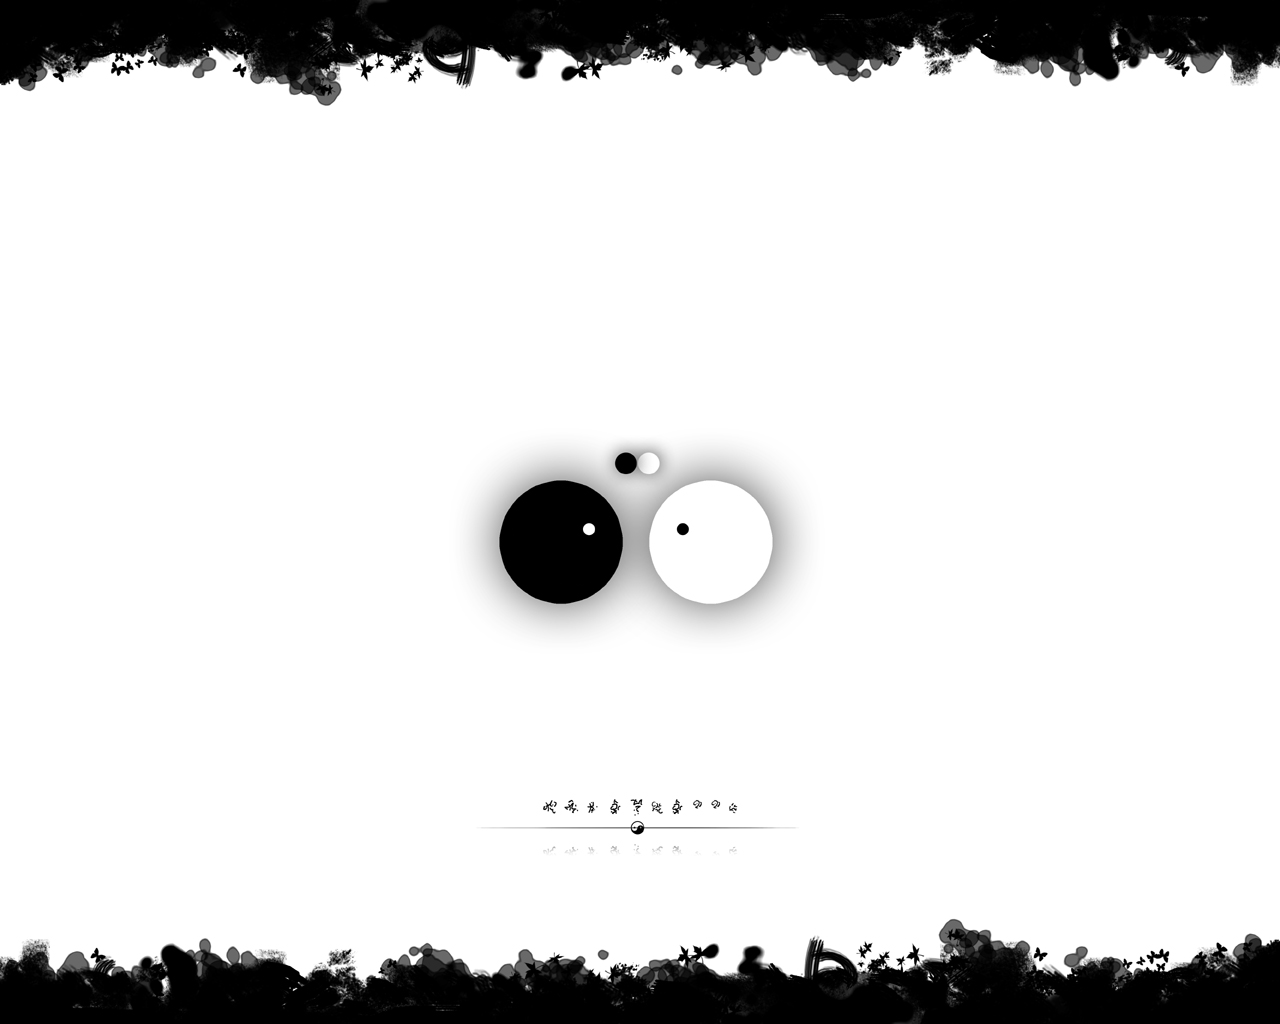 Pictures Yin Yang Wallpaper Wallpaper   SIZE 1280x1024px wallpapers